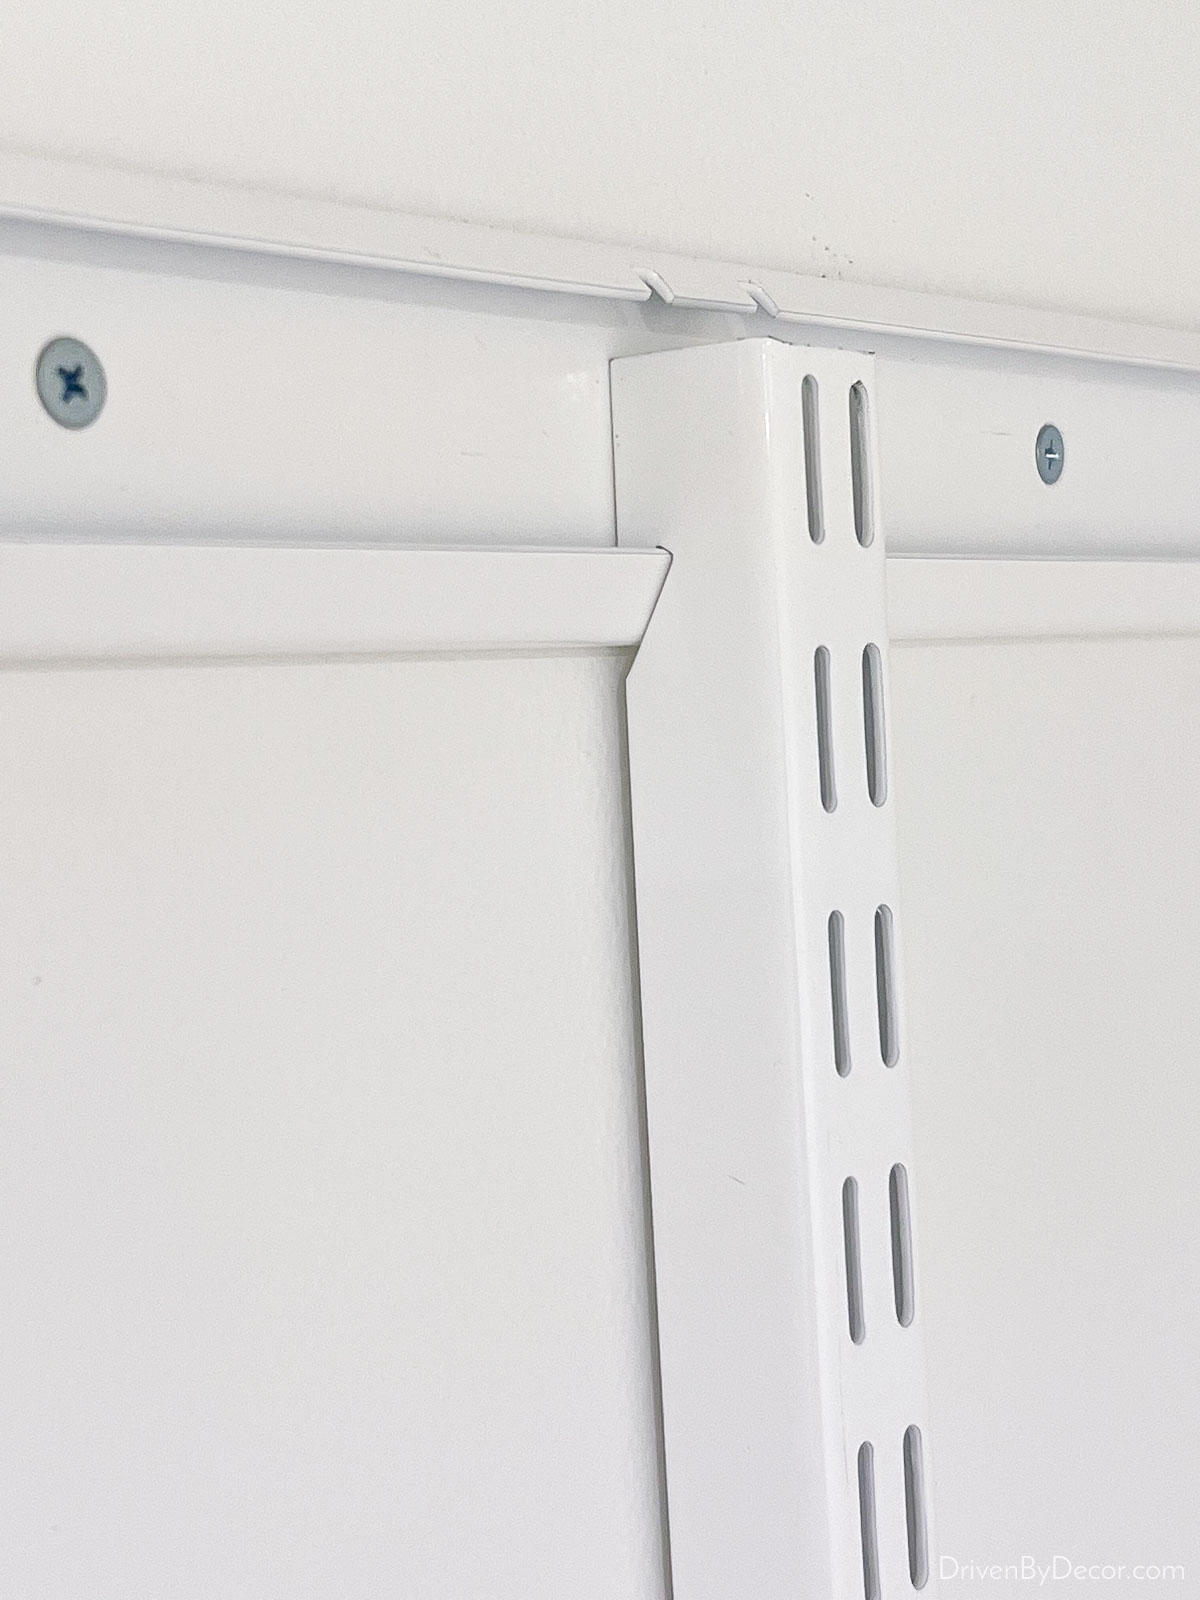 Vertical rails of the Elfa closet system hooked on the top rail